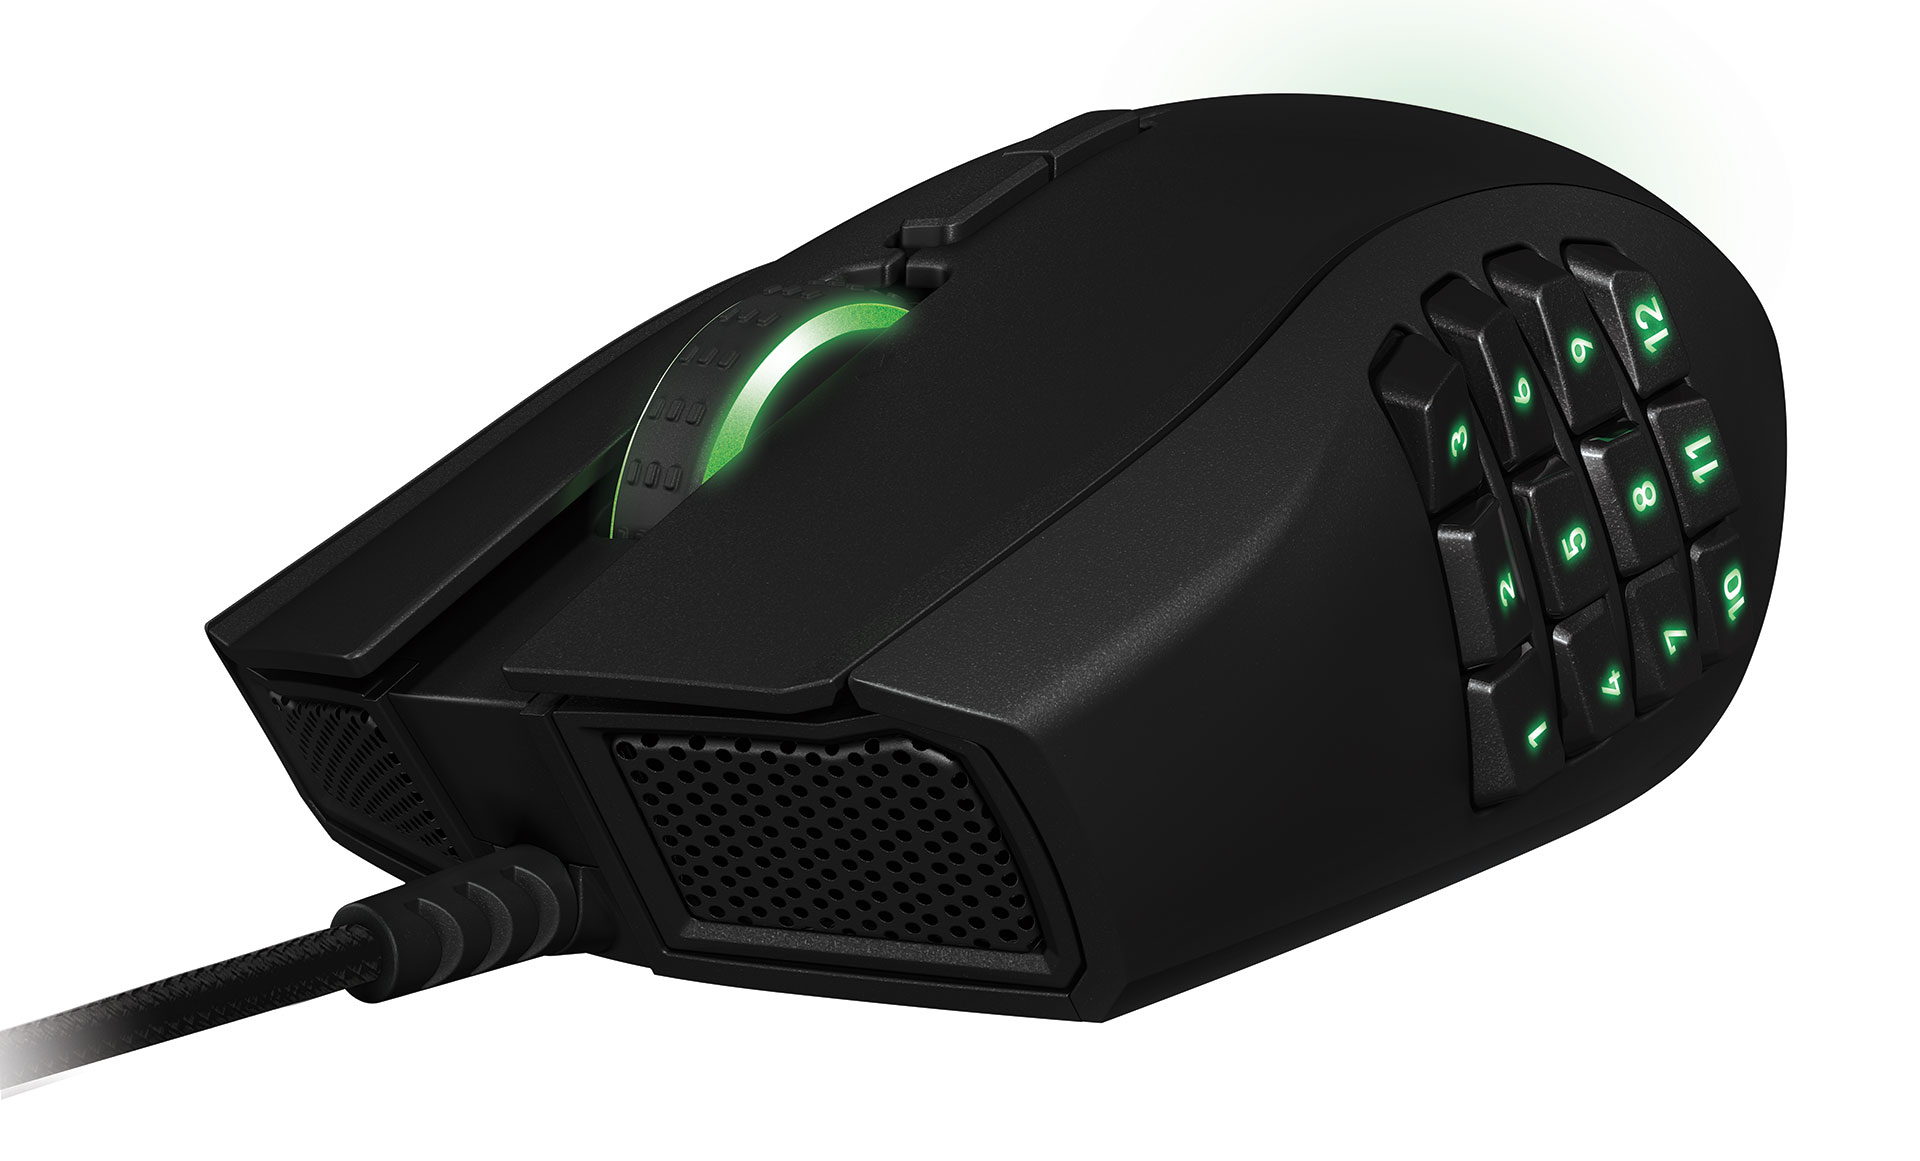 No Gaming Mouse Is This Exciting, But The New Naga Comes Close